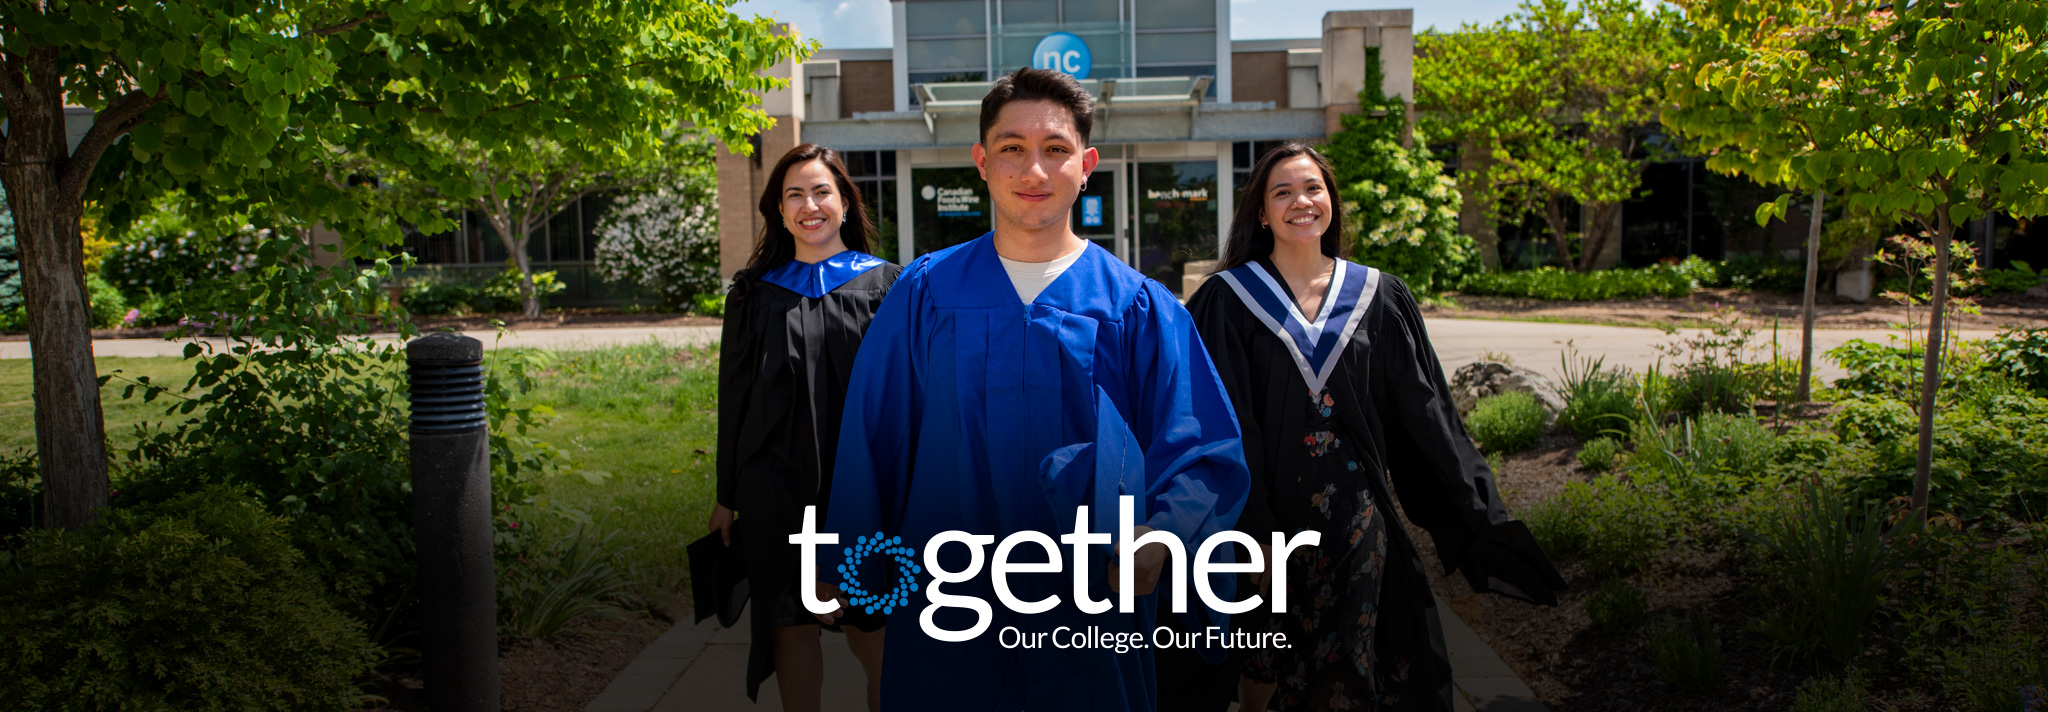 Three confident graduates striding toward the camera with greenery and NC logo in background, campaign logo: together Our College. Our Future.